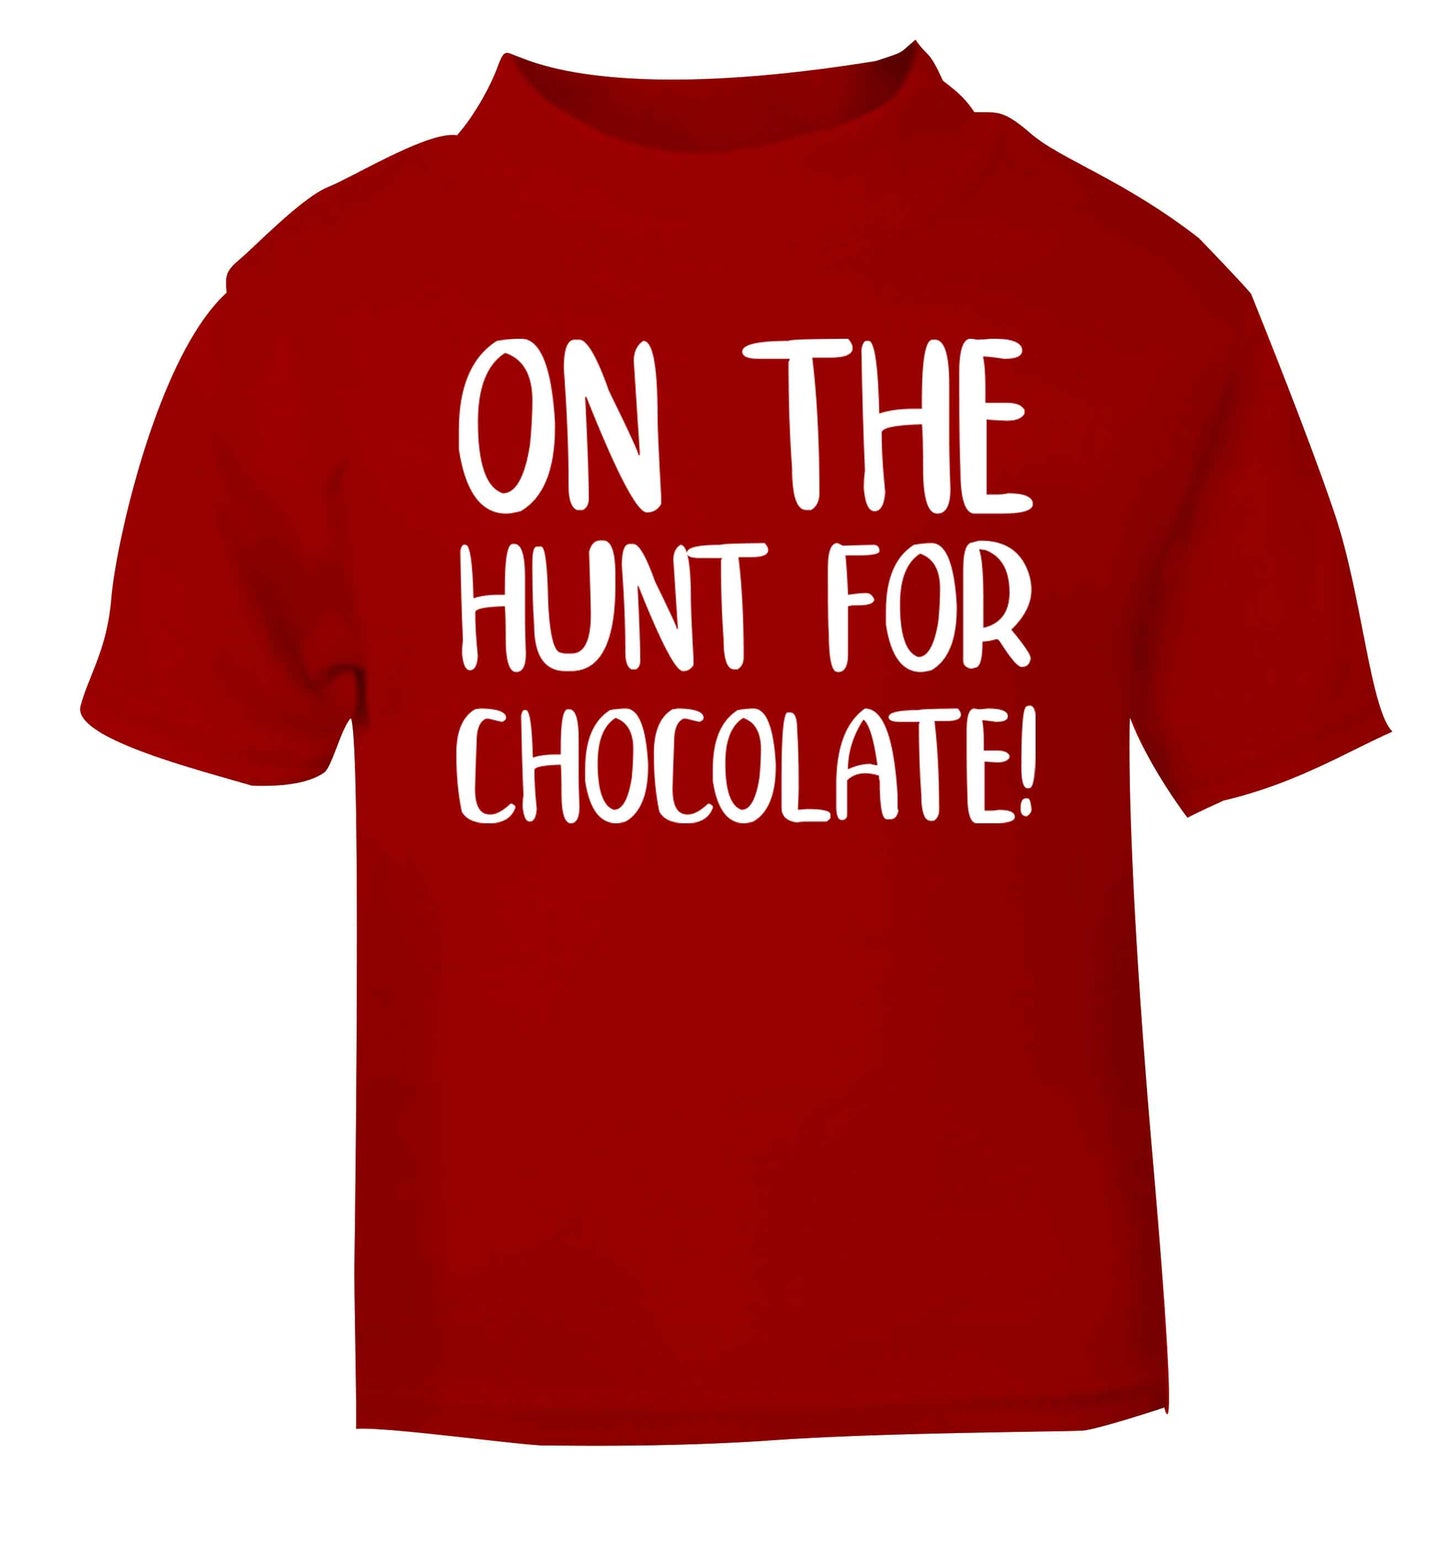 On the hunt for chocolate! red baby toddler Tshirt 2 Years